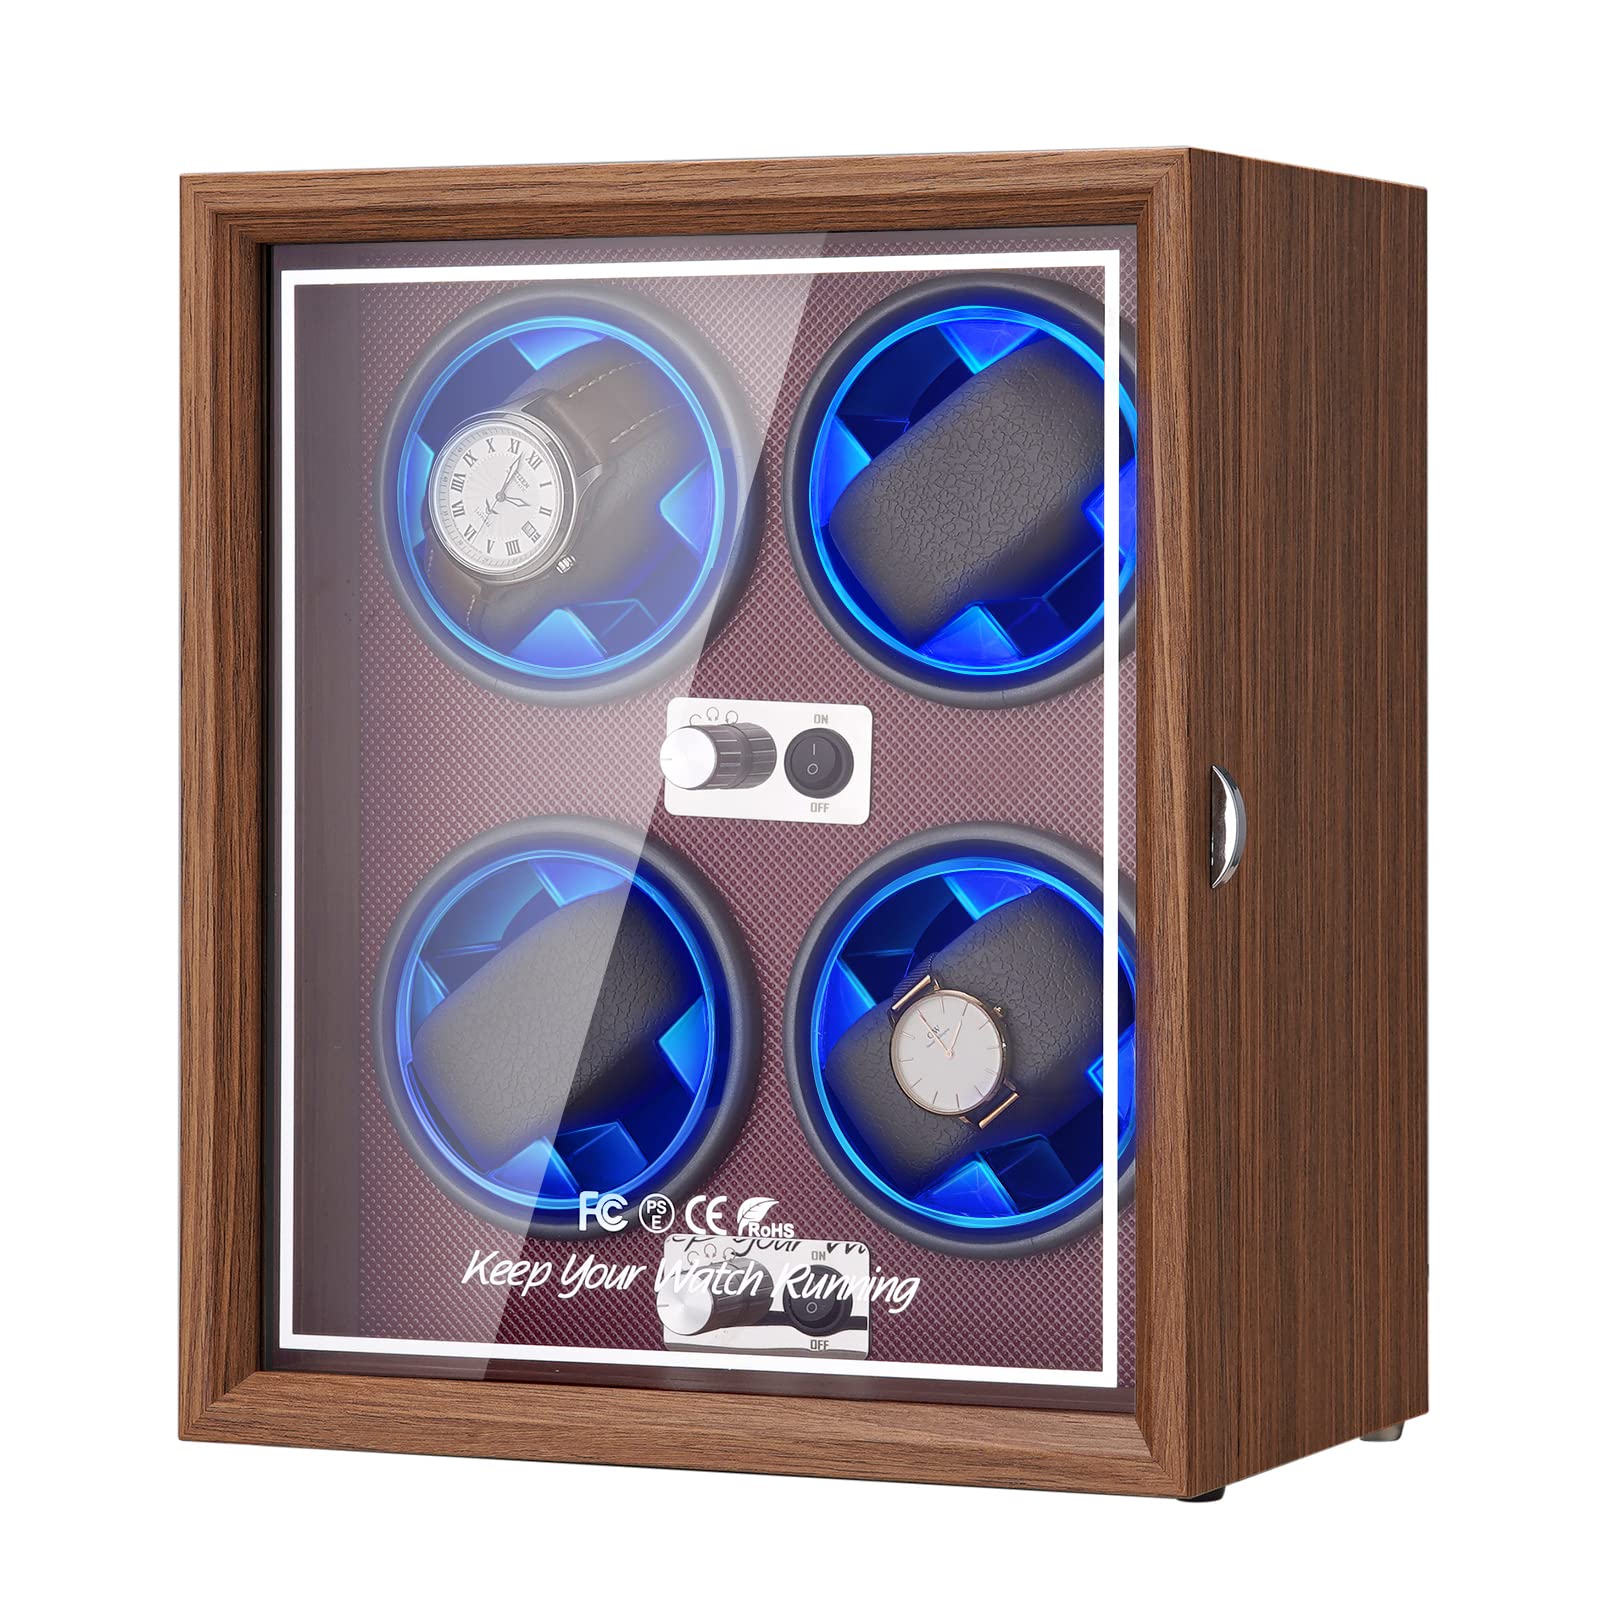 LALAHOO Watch Winder for Automatic Watches, Ultra Quiet Motor for 4 Automatic Watches with LED Lights, Automatic Watch Winder with 4 Rotation Modes